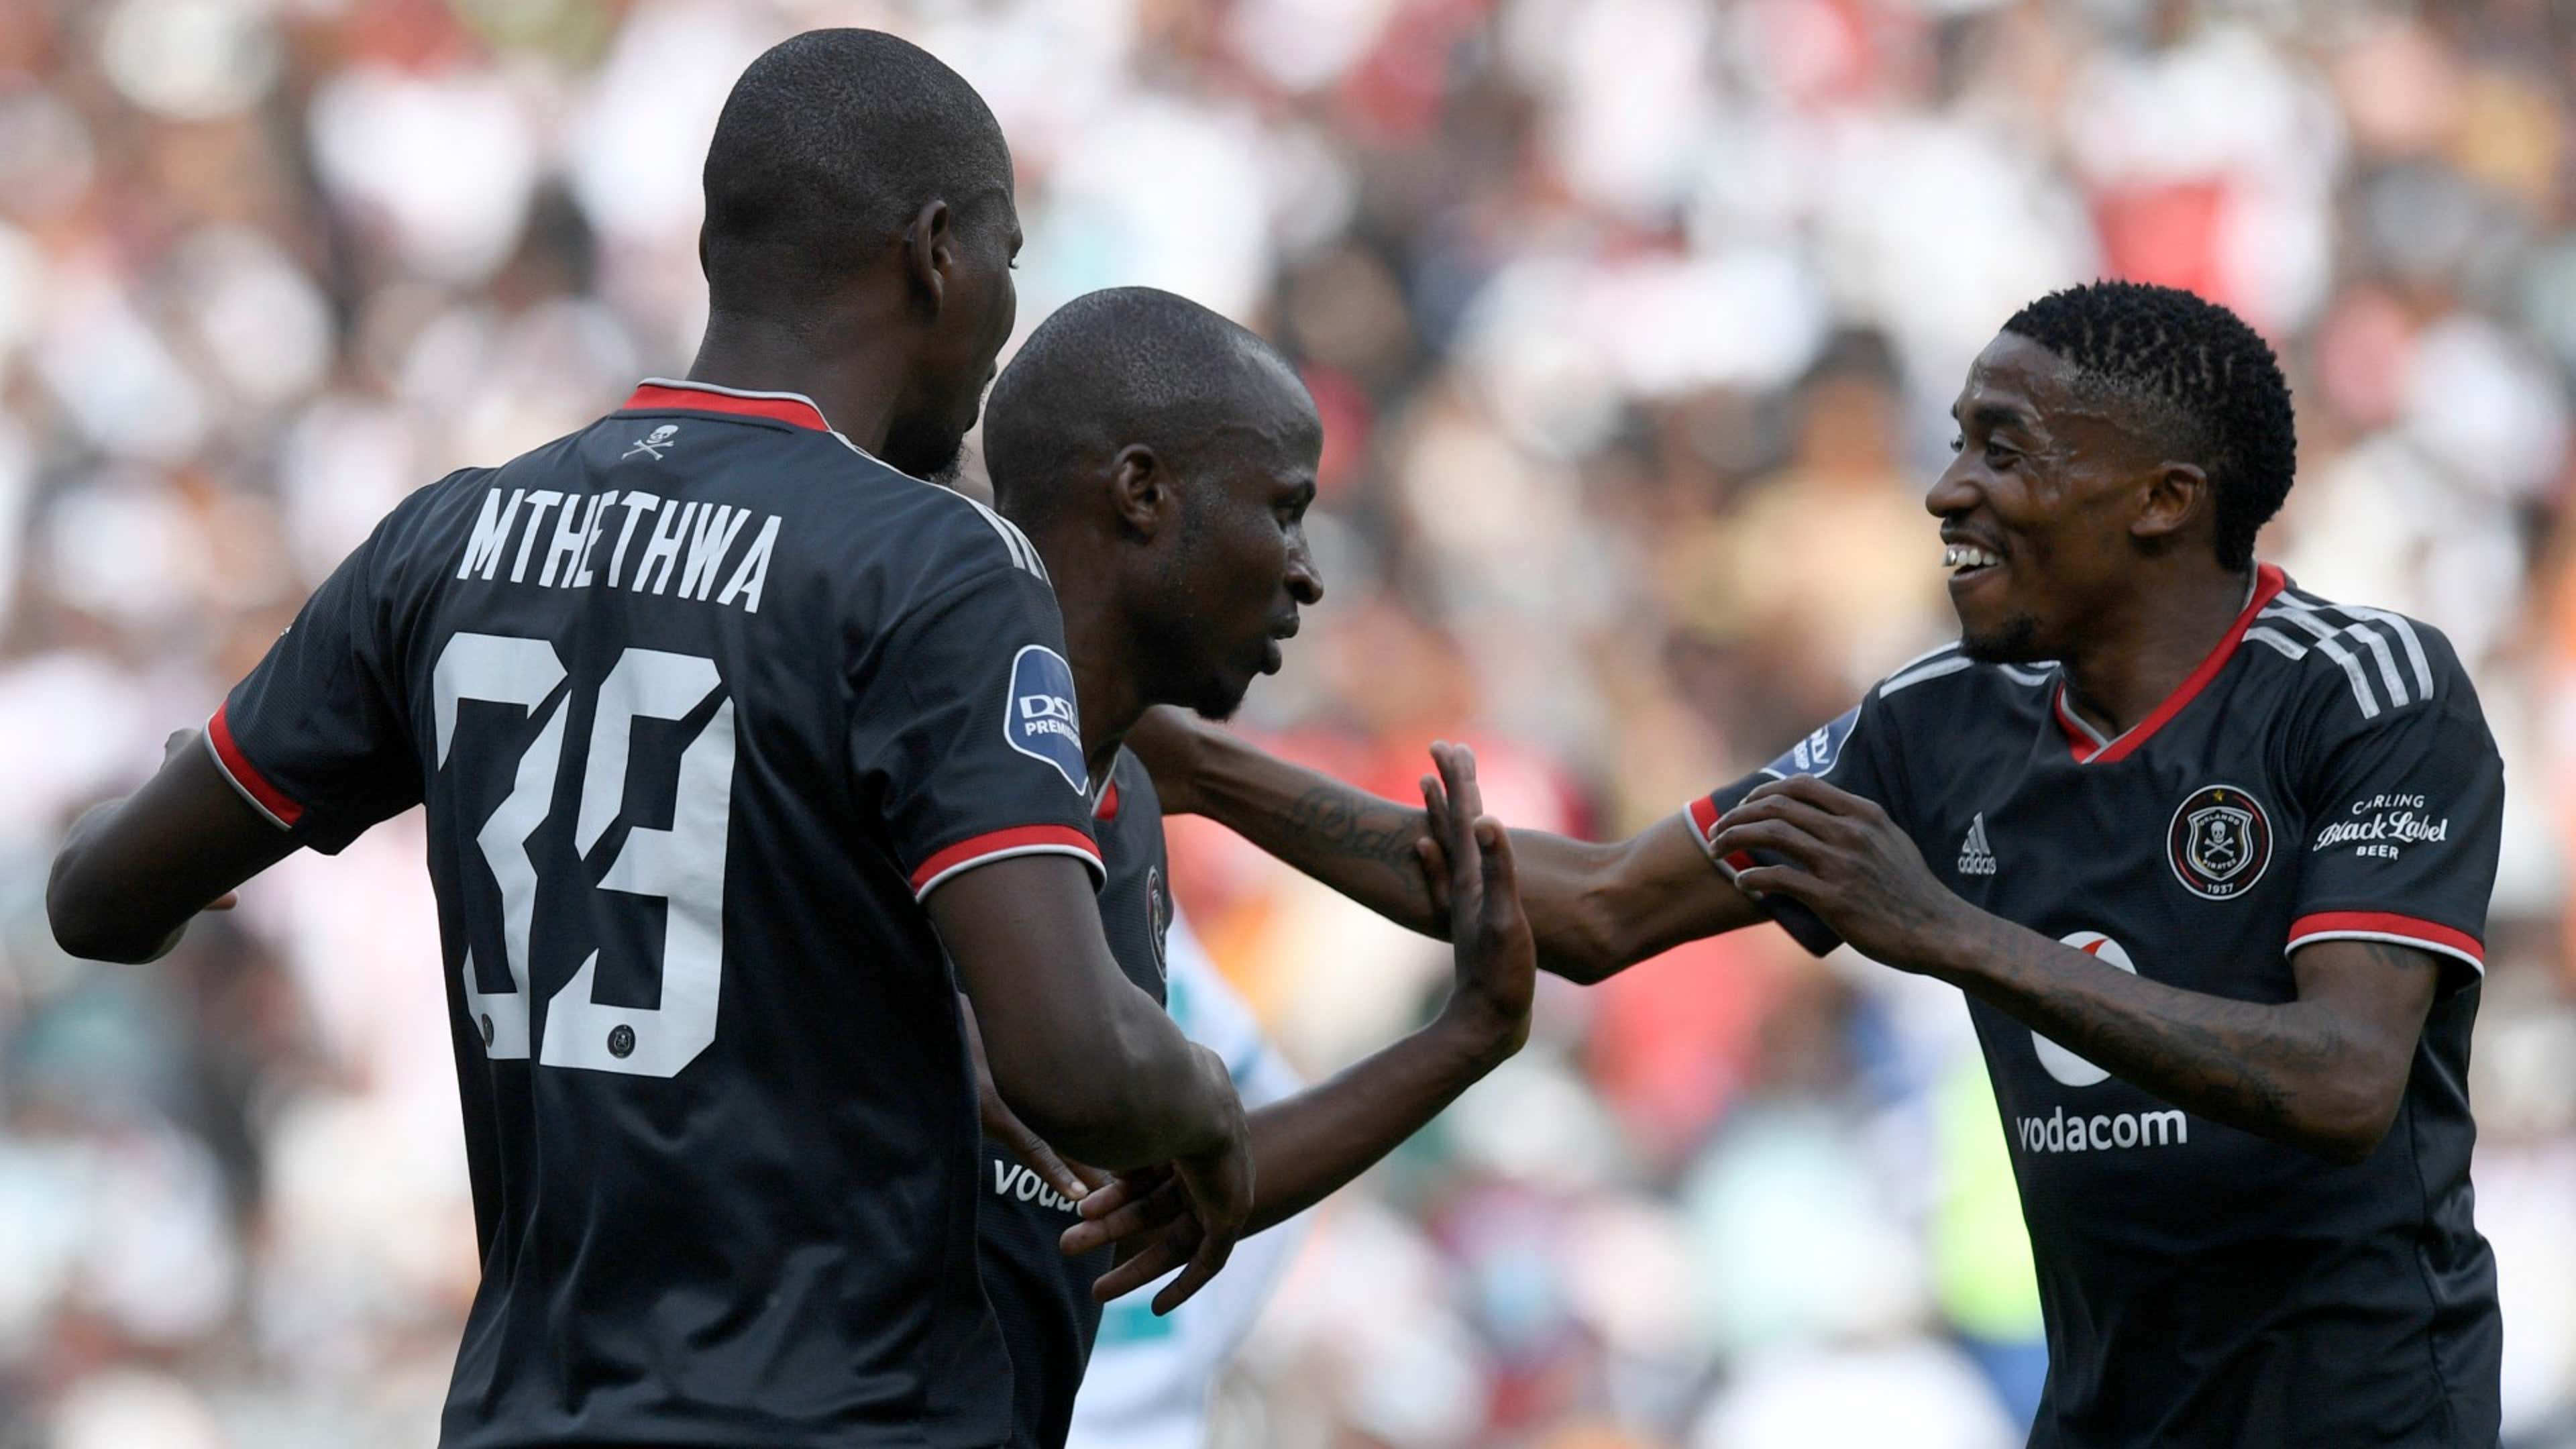 Orlando Pirates to face Real Madrid? - Soweto giants' opponents in Spain  training camp revealed